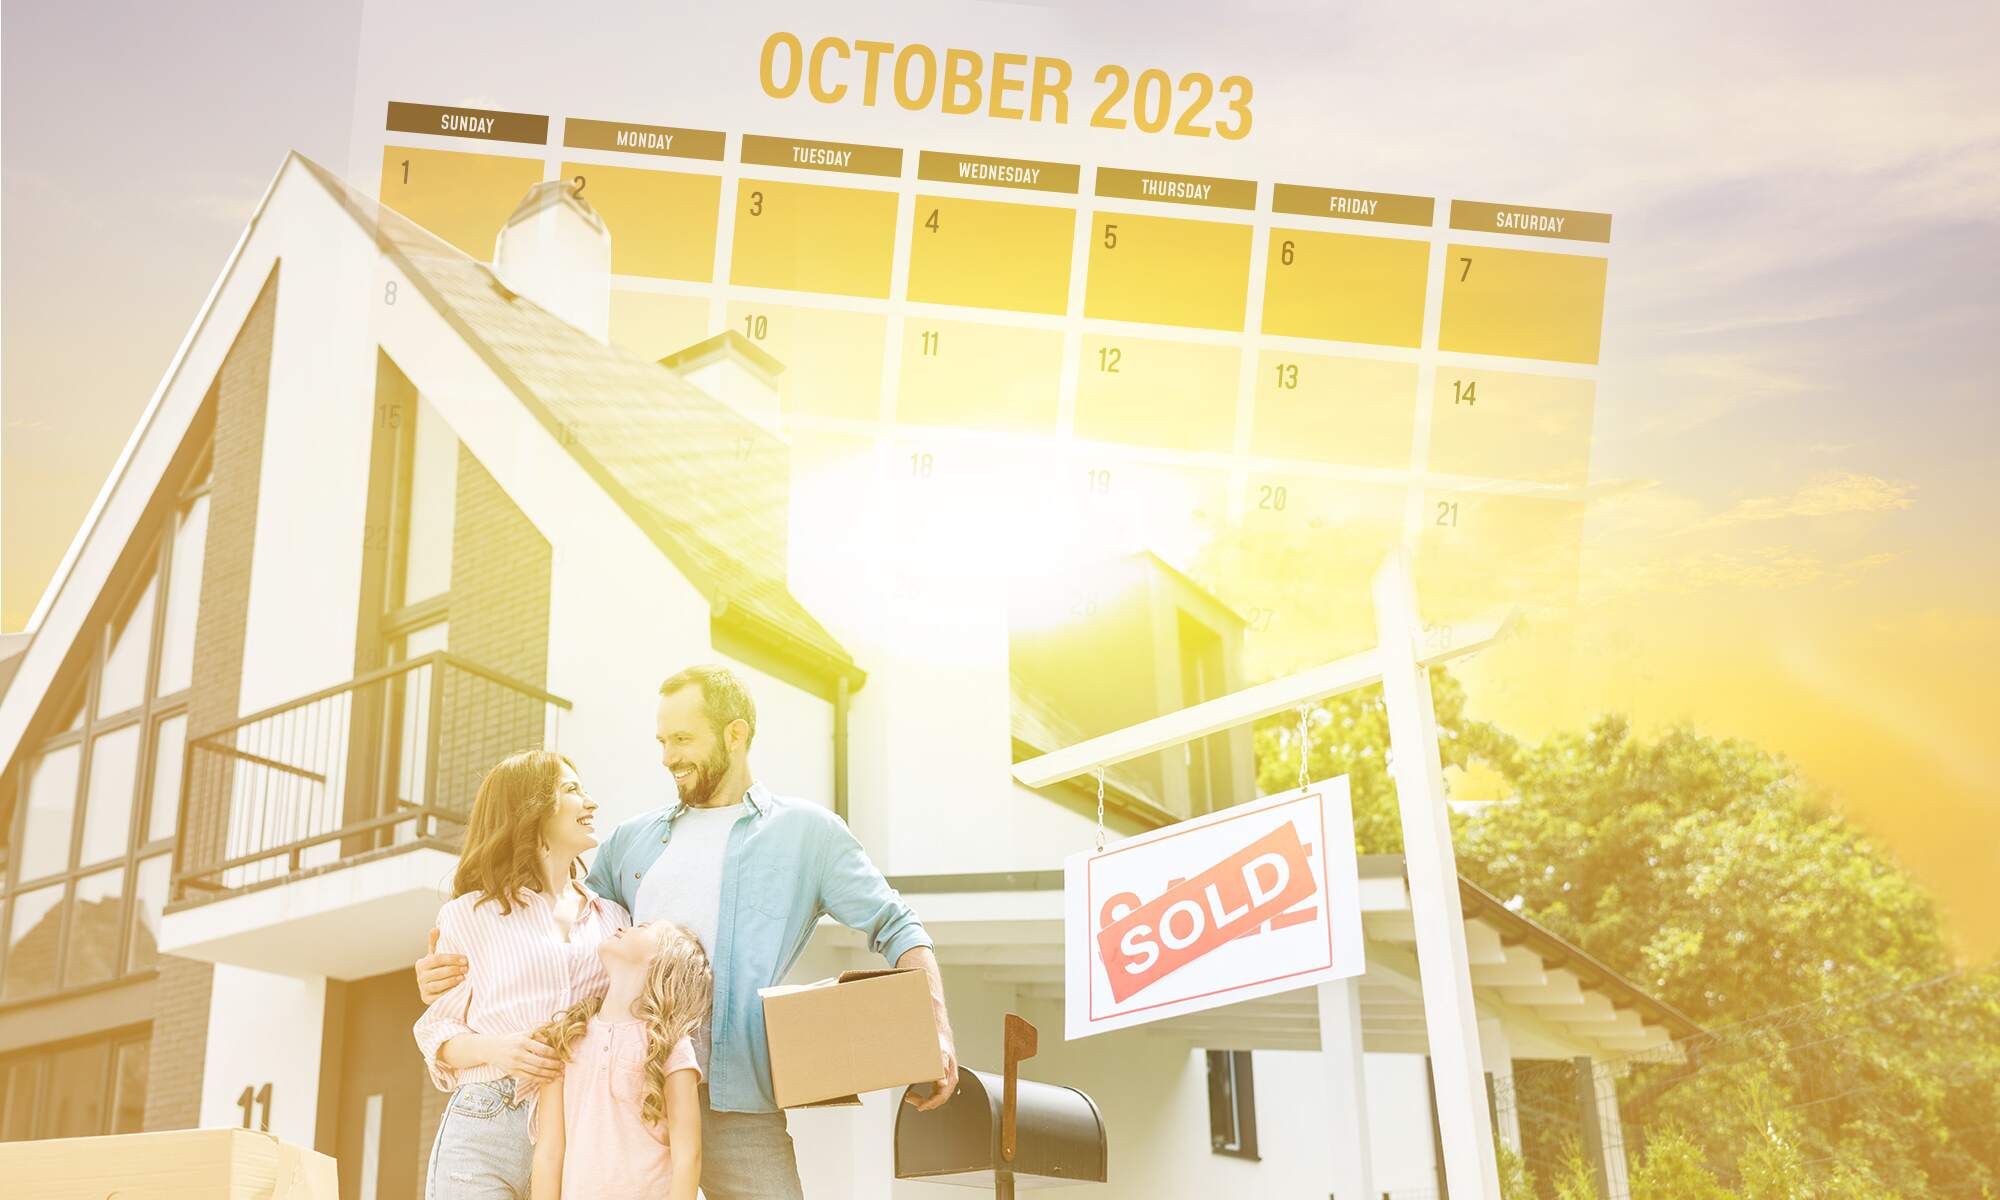 This Is the Best Week to Buy a Home In 2023, According to Realtor.com